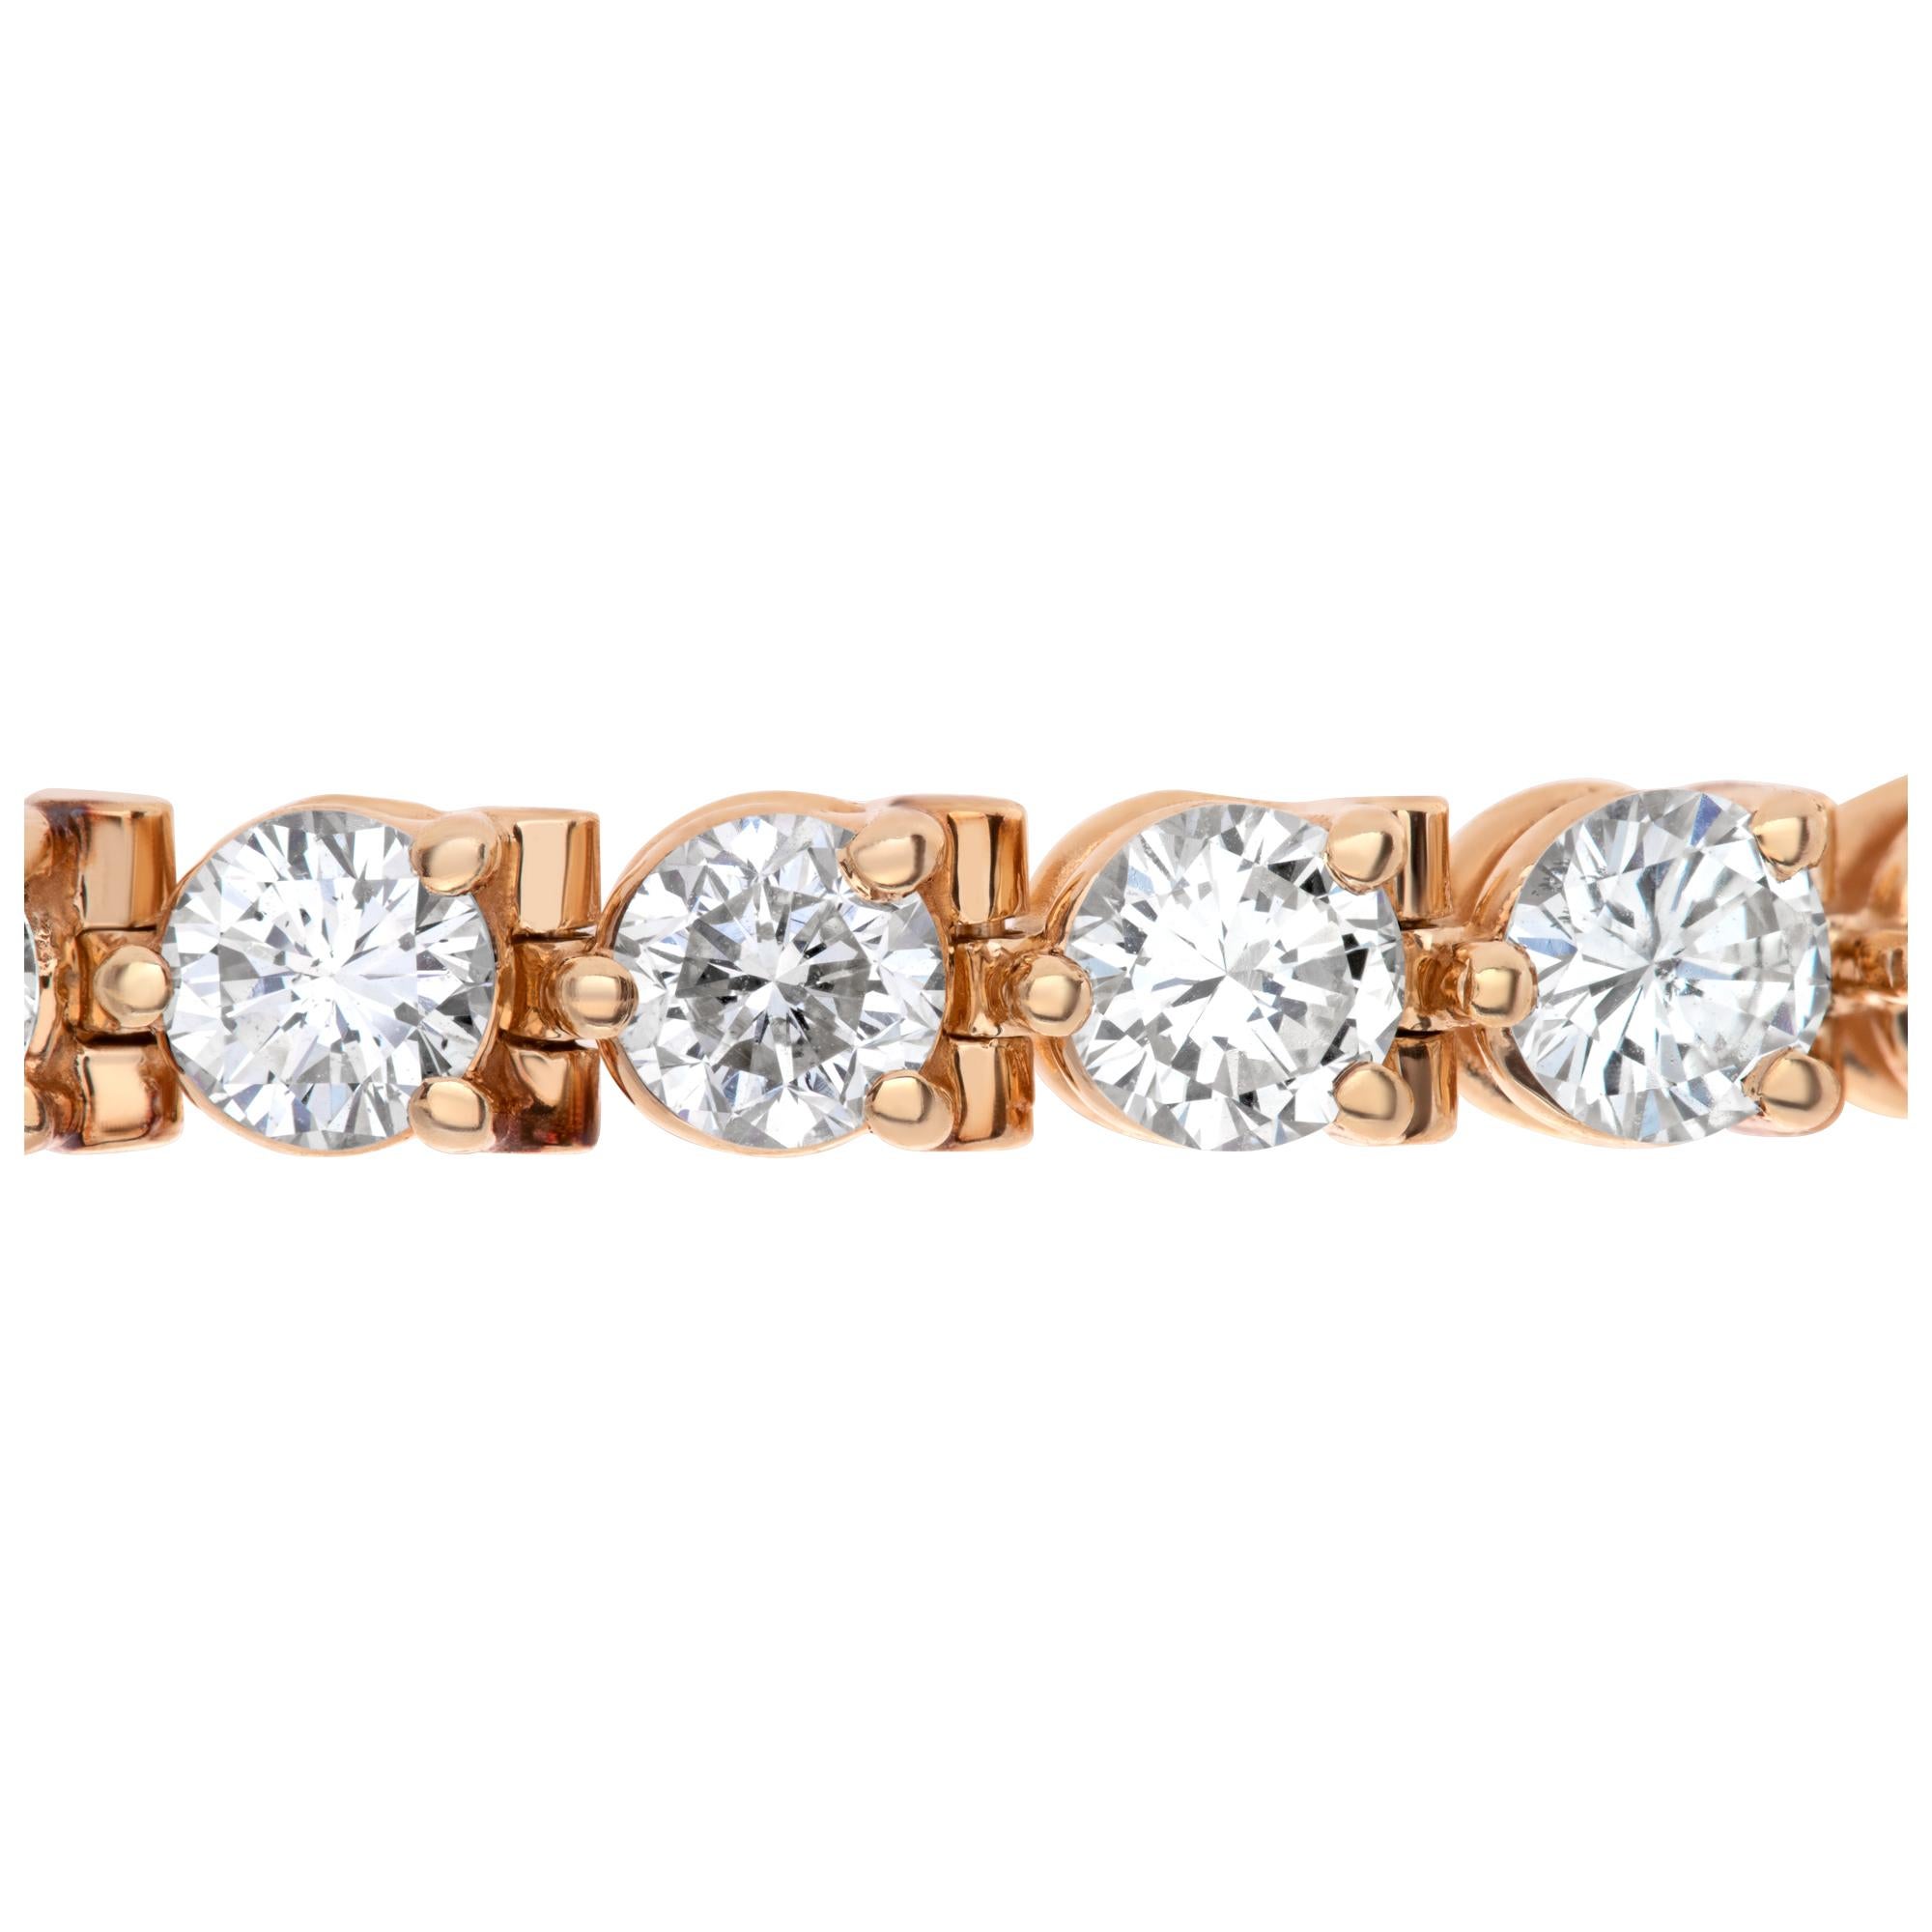 Sparkling diamond line bracelet in 14k yellow gold with approximately 10 carats in diamonds H-I color, SI clarity. 7 inch length.
